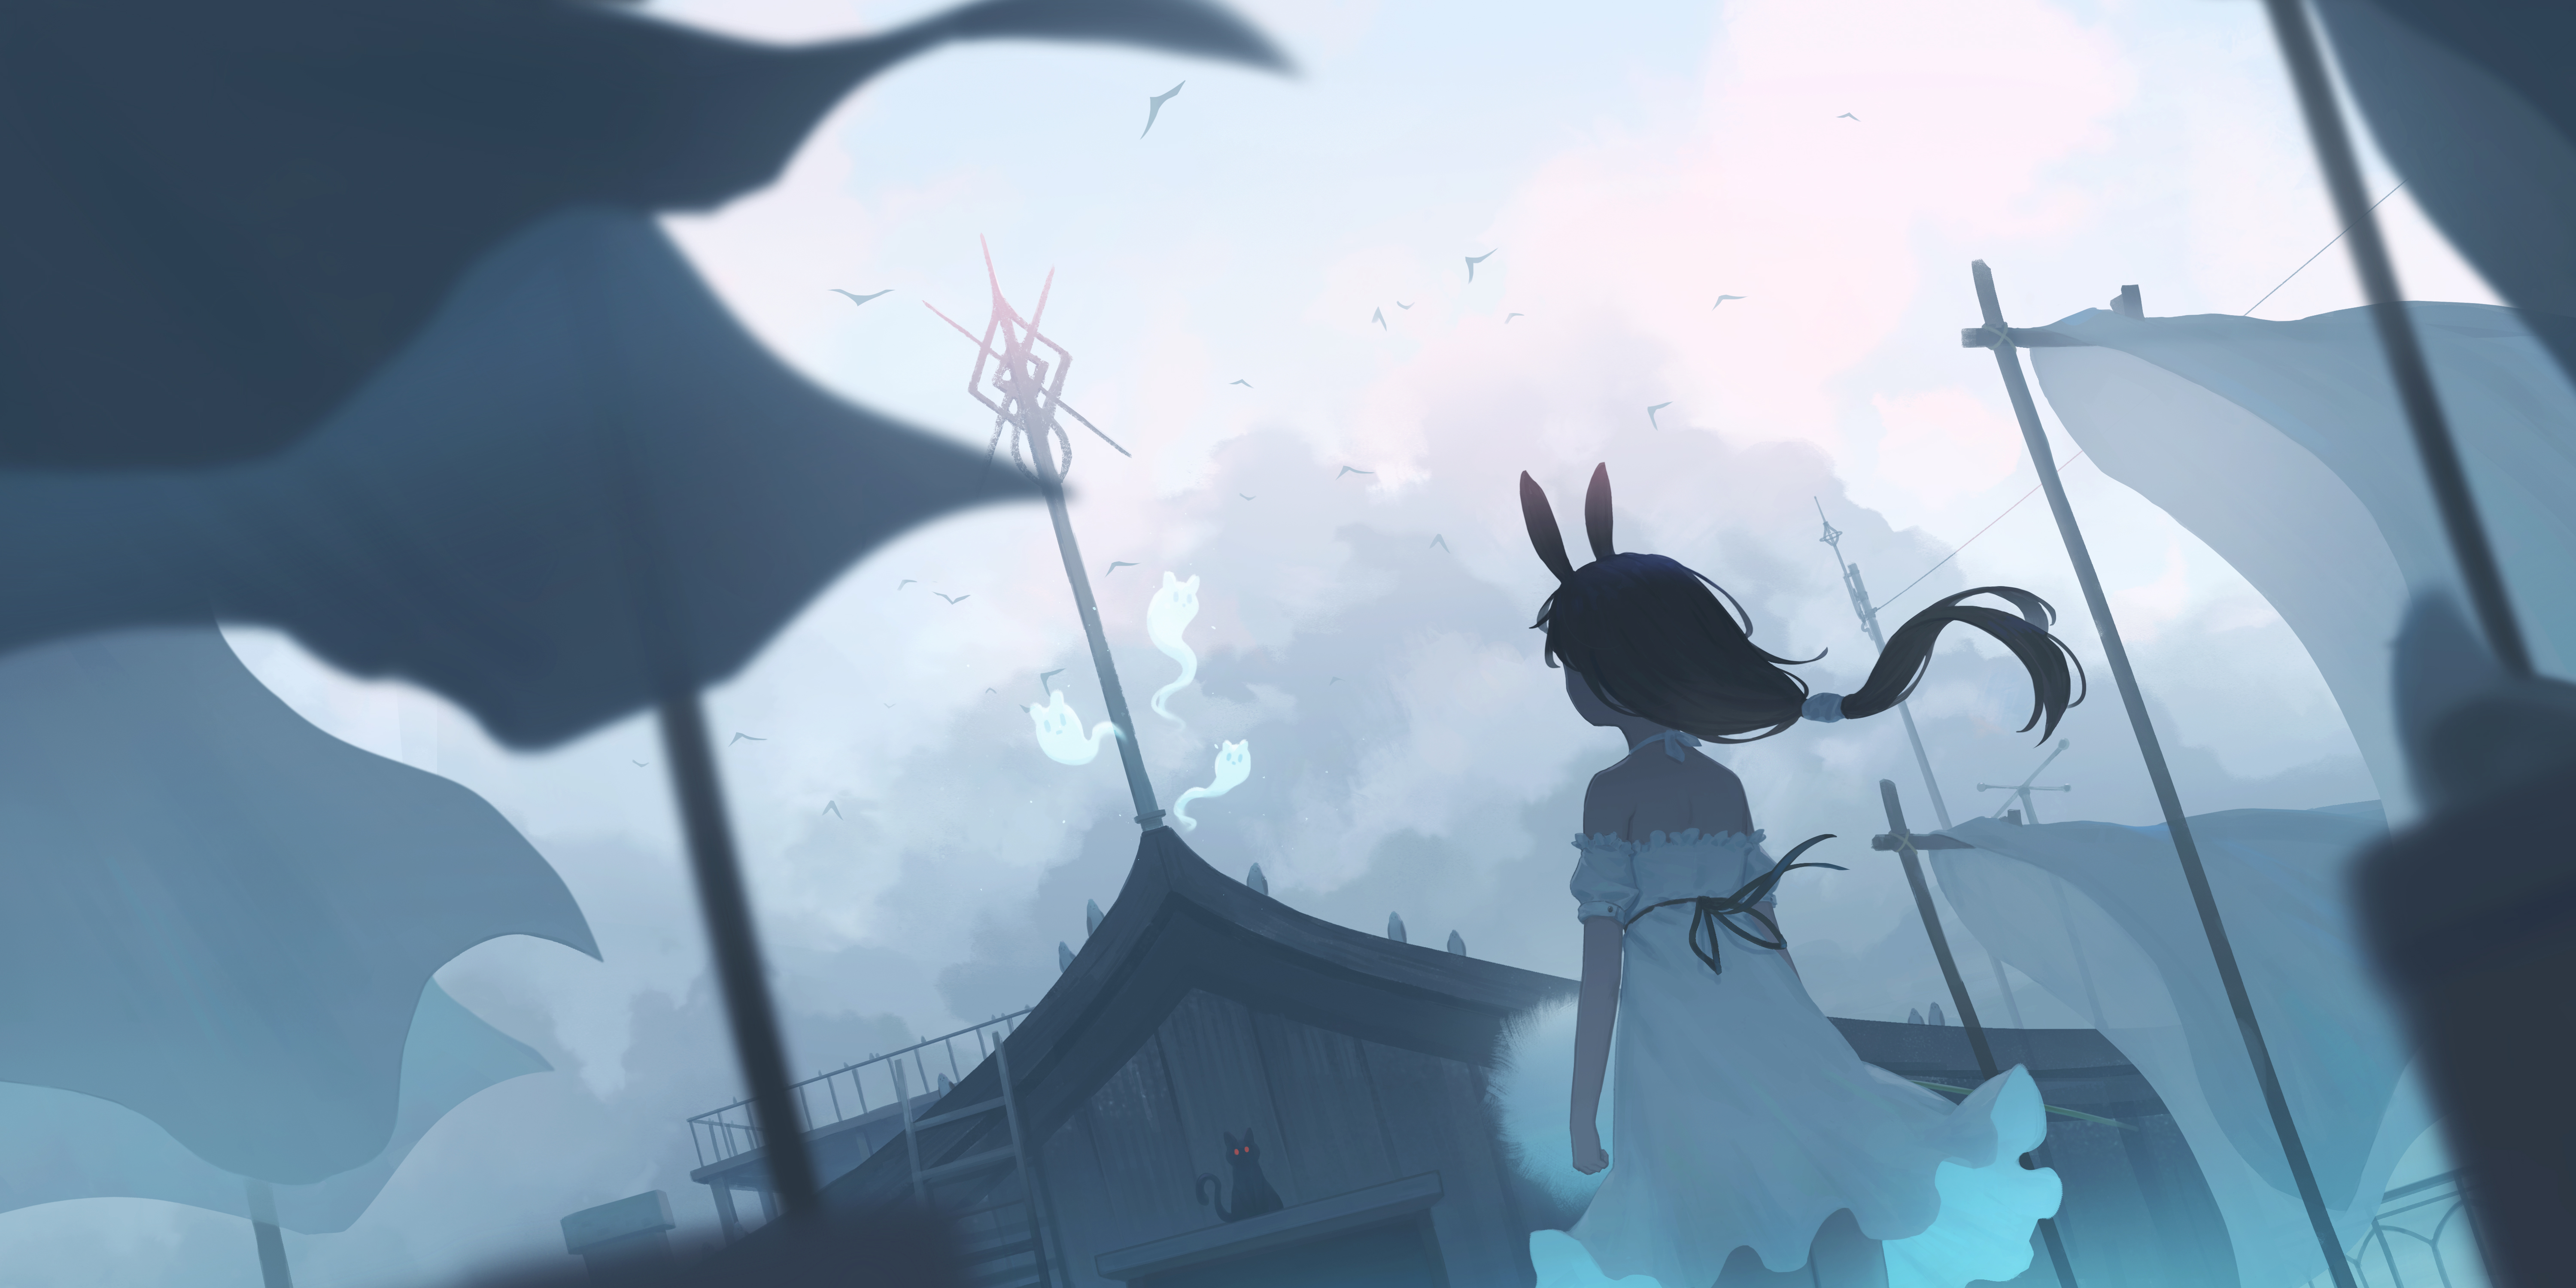 Anime 6000x3000 anime anime girls bunny girl bunny ears long hair standing looking into the distance sky clouds dress cats animals ghost